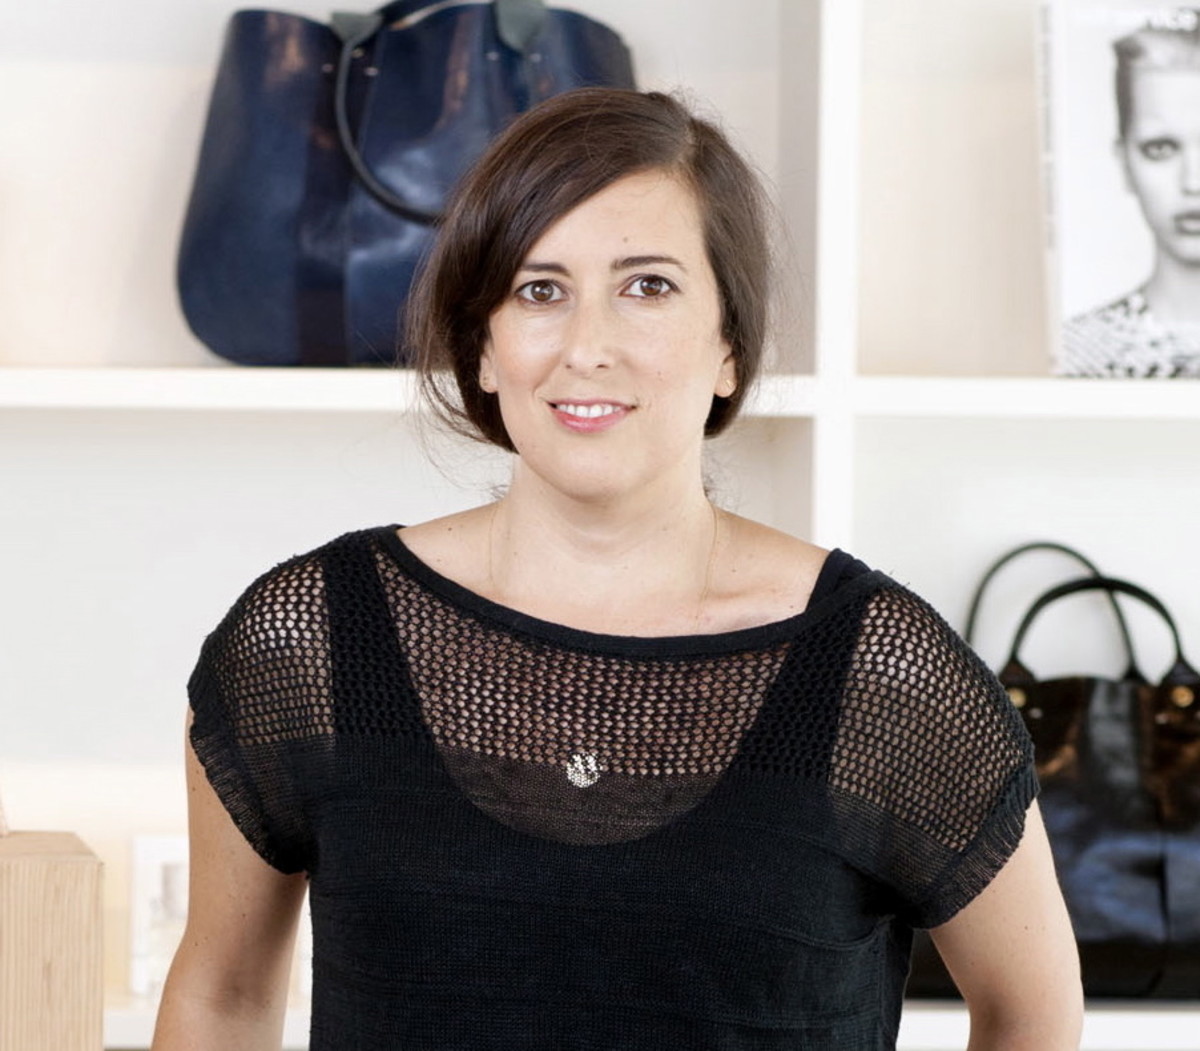 Clare Vivier started with a bag, then a blog and then conquered